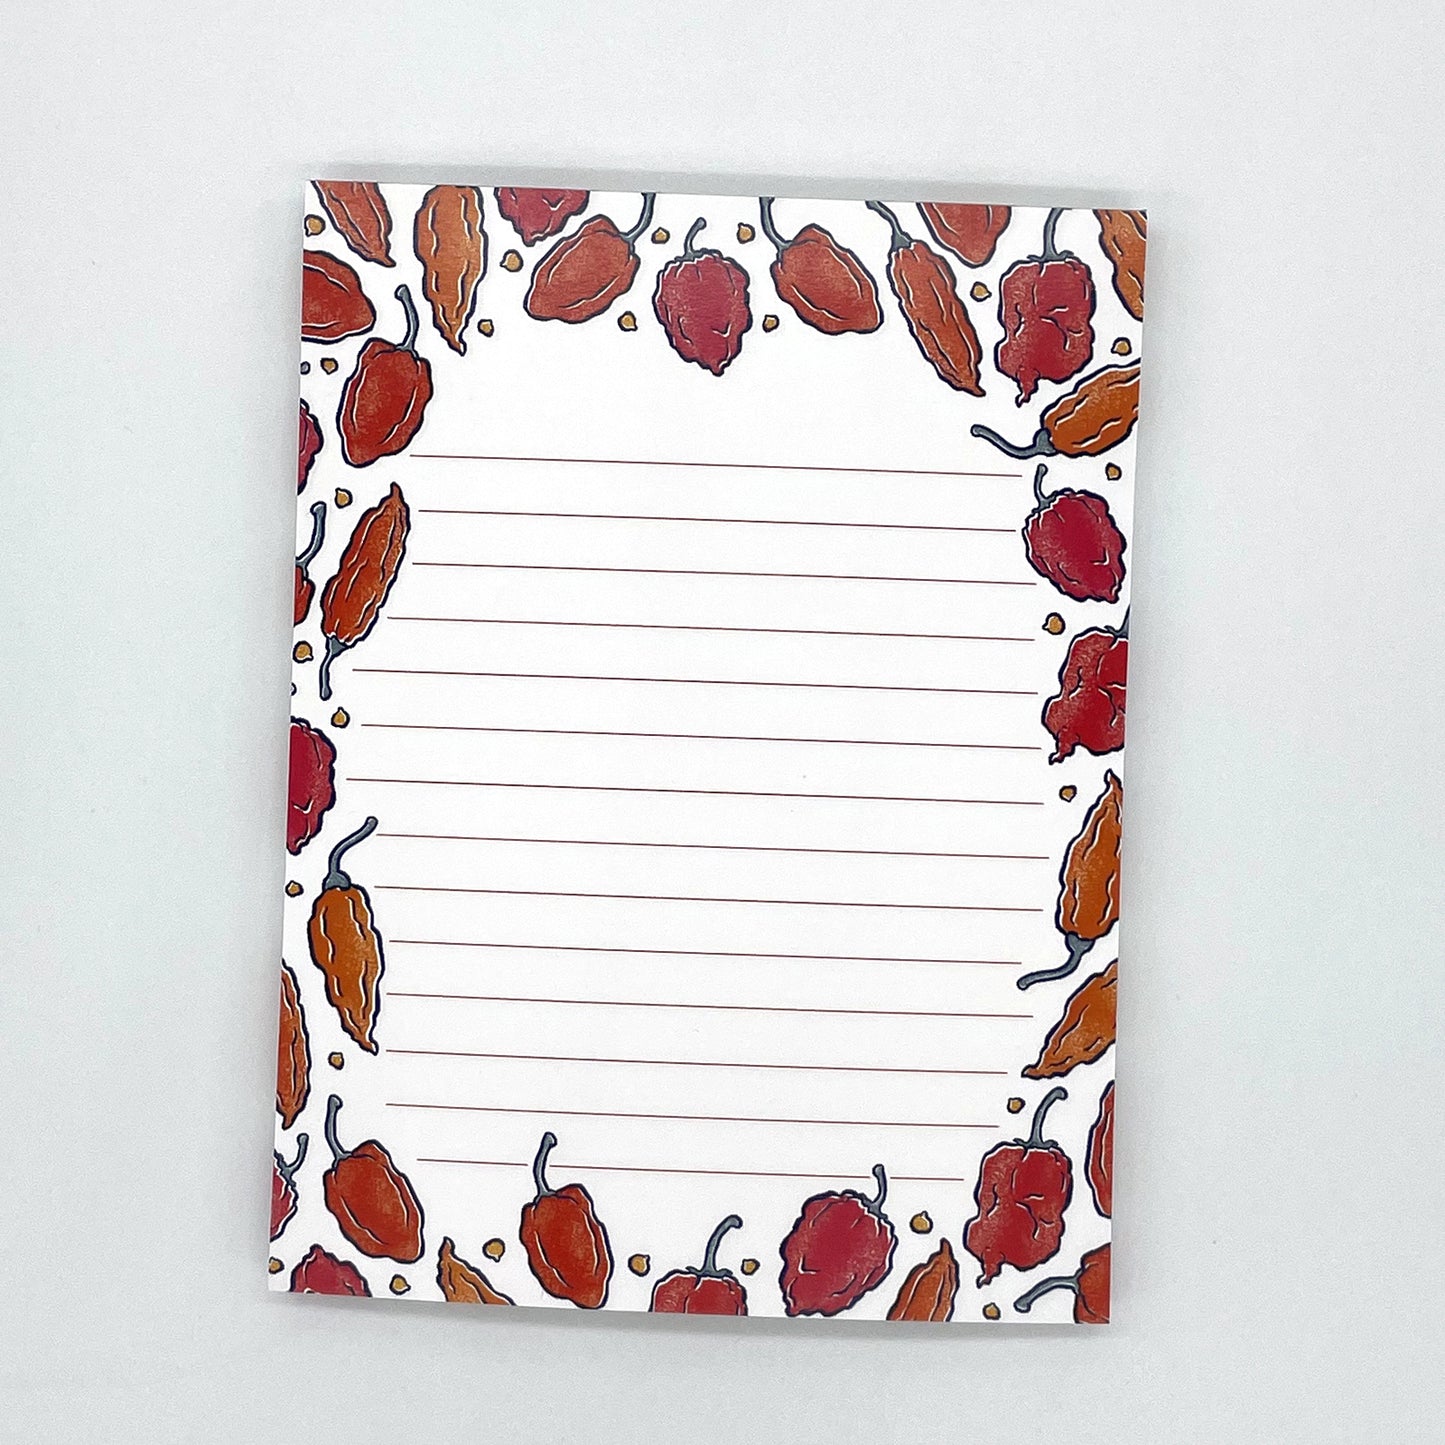 A white lined notepad features illustrations of hot peppers in orange and red.